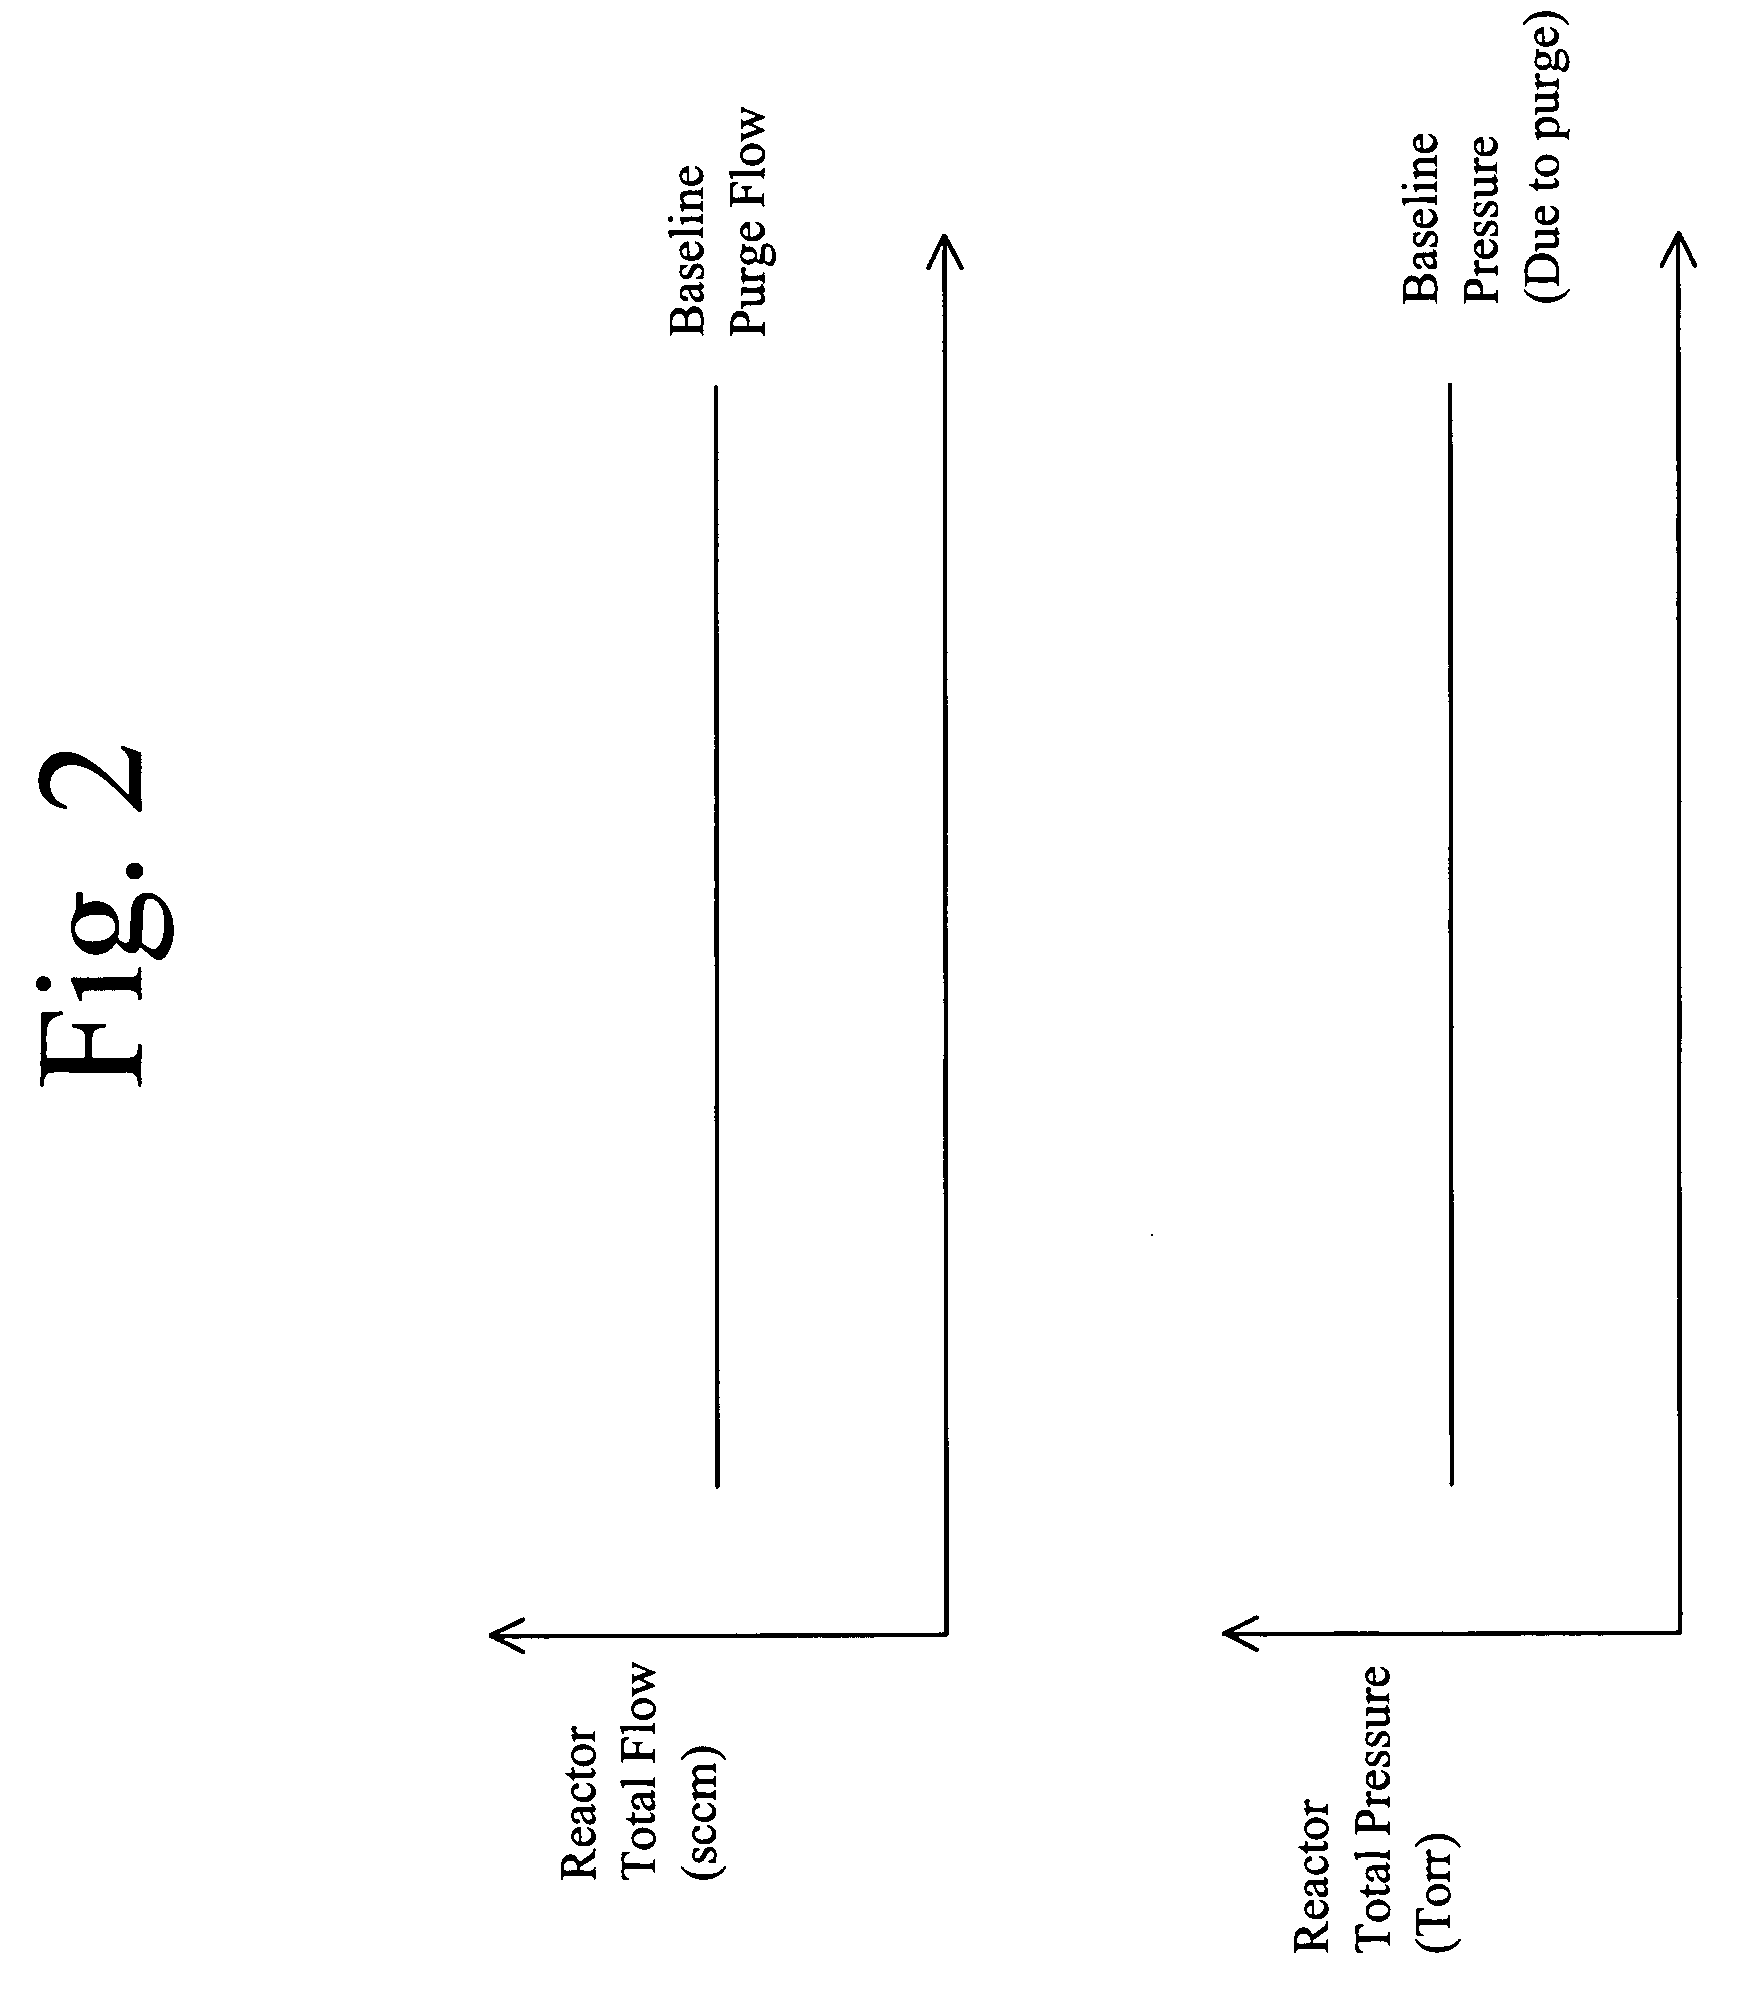 Methods and apparatus for cycle time improvements for atomic layer deposition